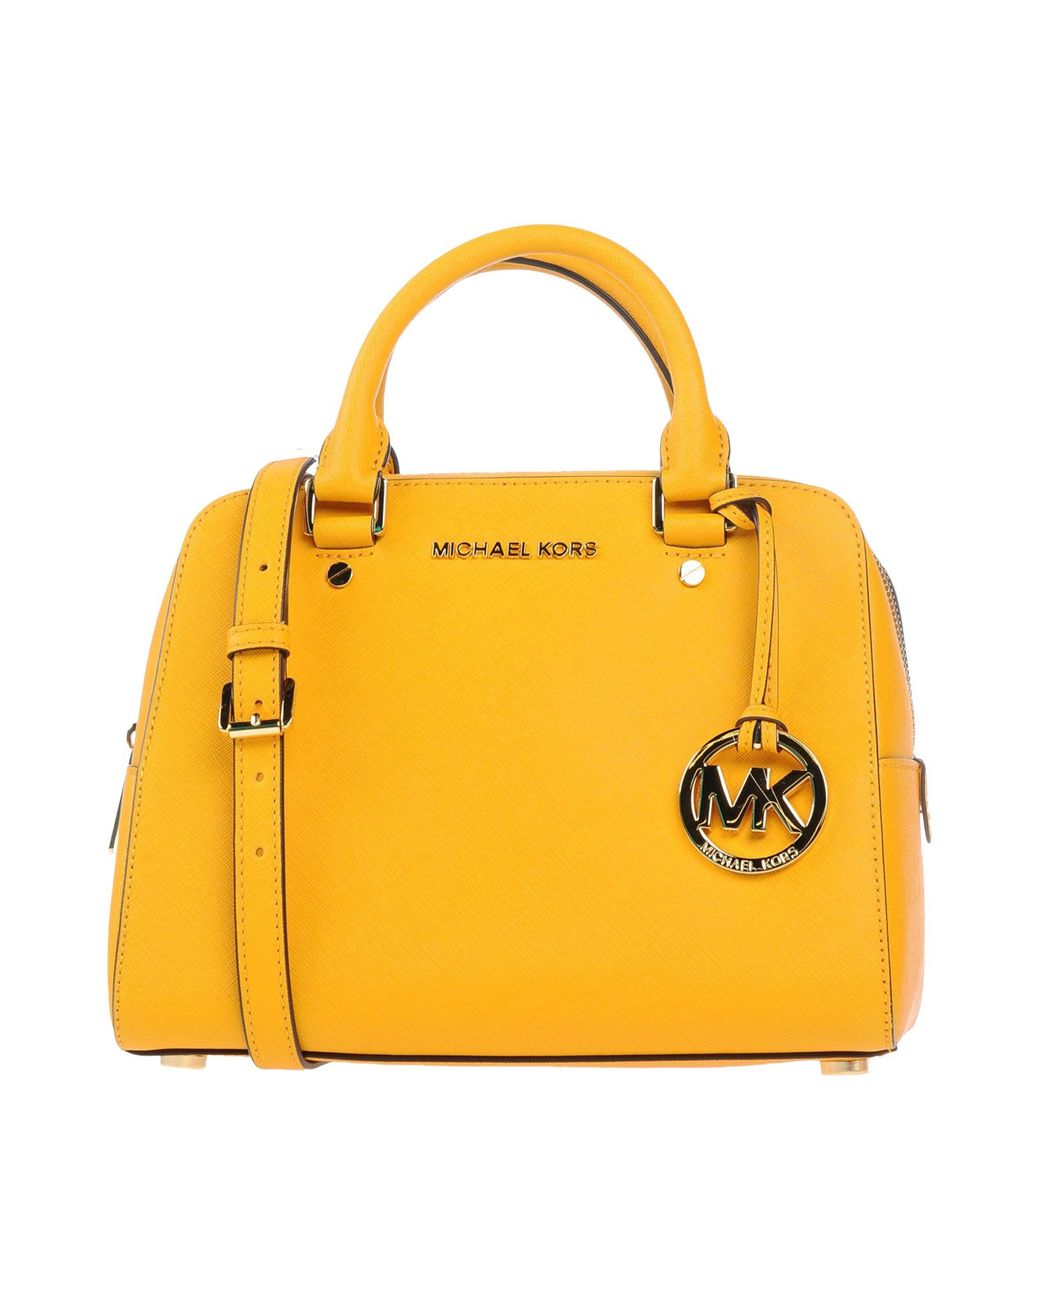 Leather crossbody bag Michael Kors Yellow in Leather  25257020